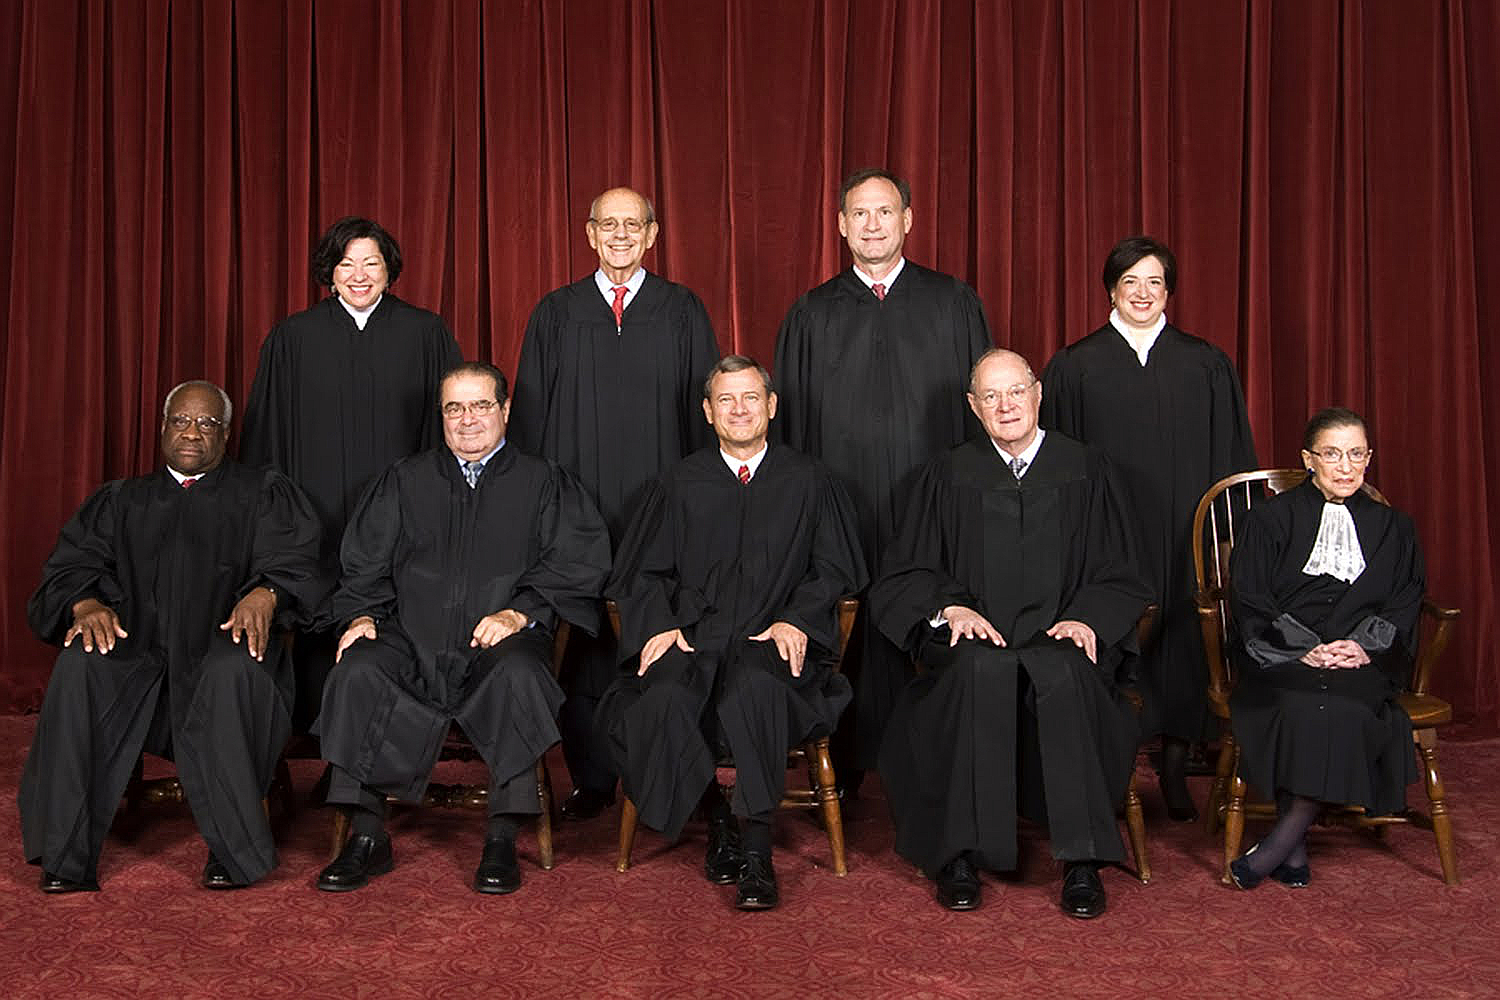 Image: CLUELESS: Most Americans can’t name a single U.S. Supreme Court justice